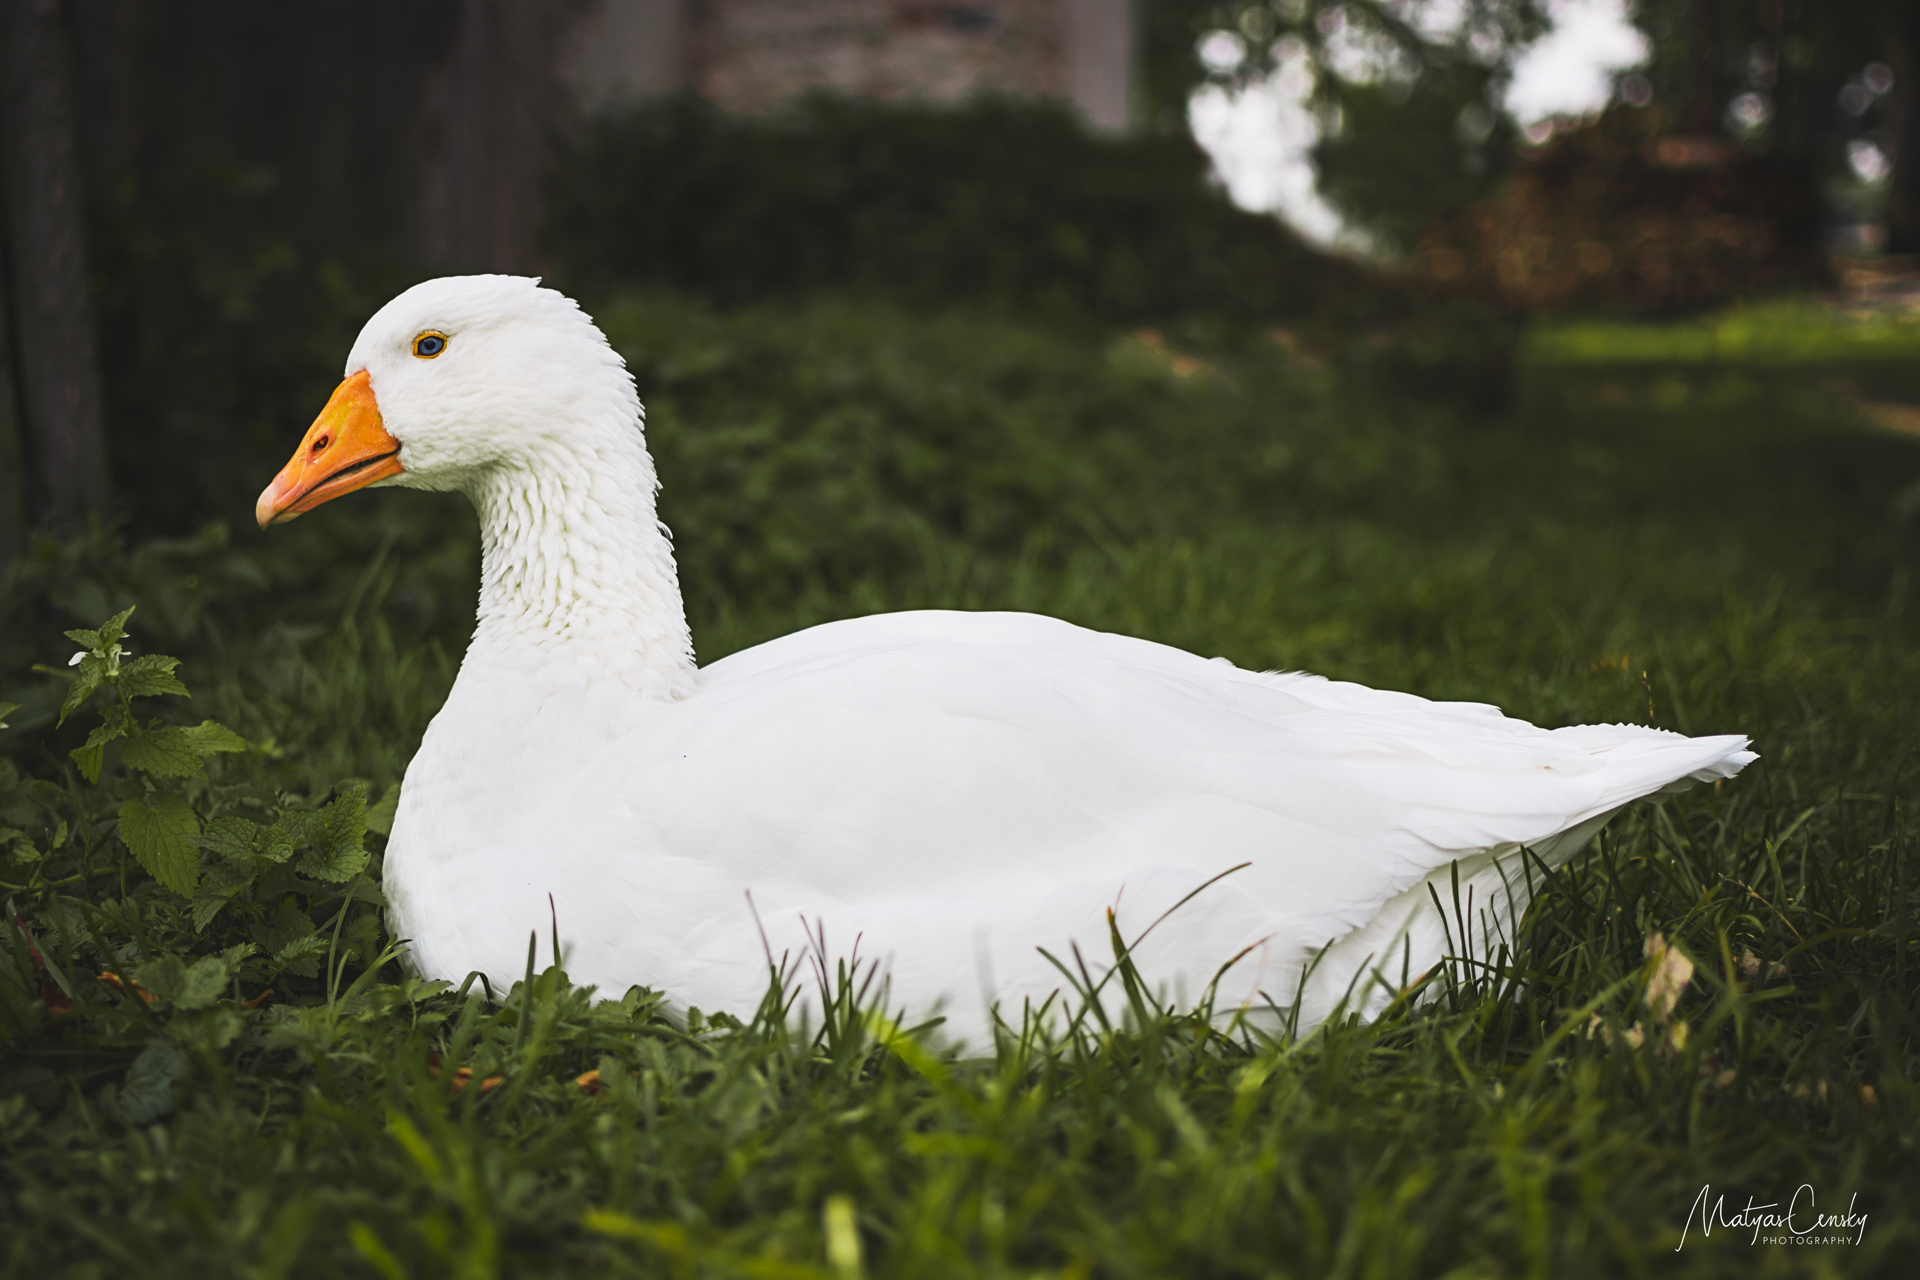 Photo of a white goose sitting in a green grass with bight orange beak and blue eye.